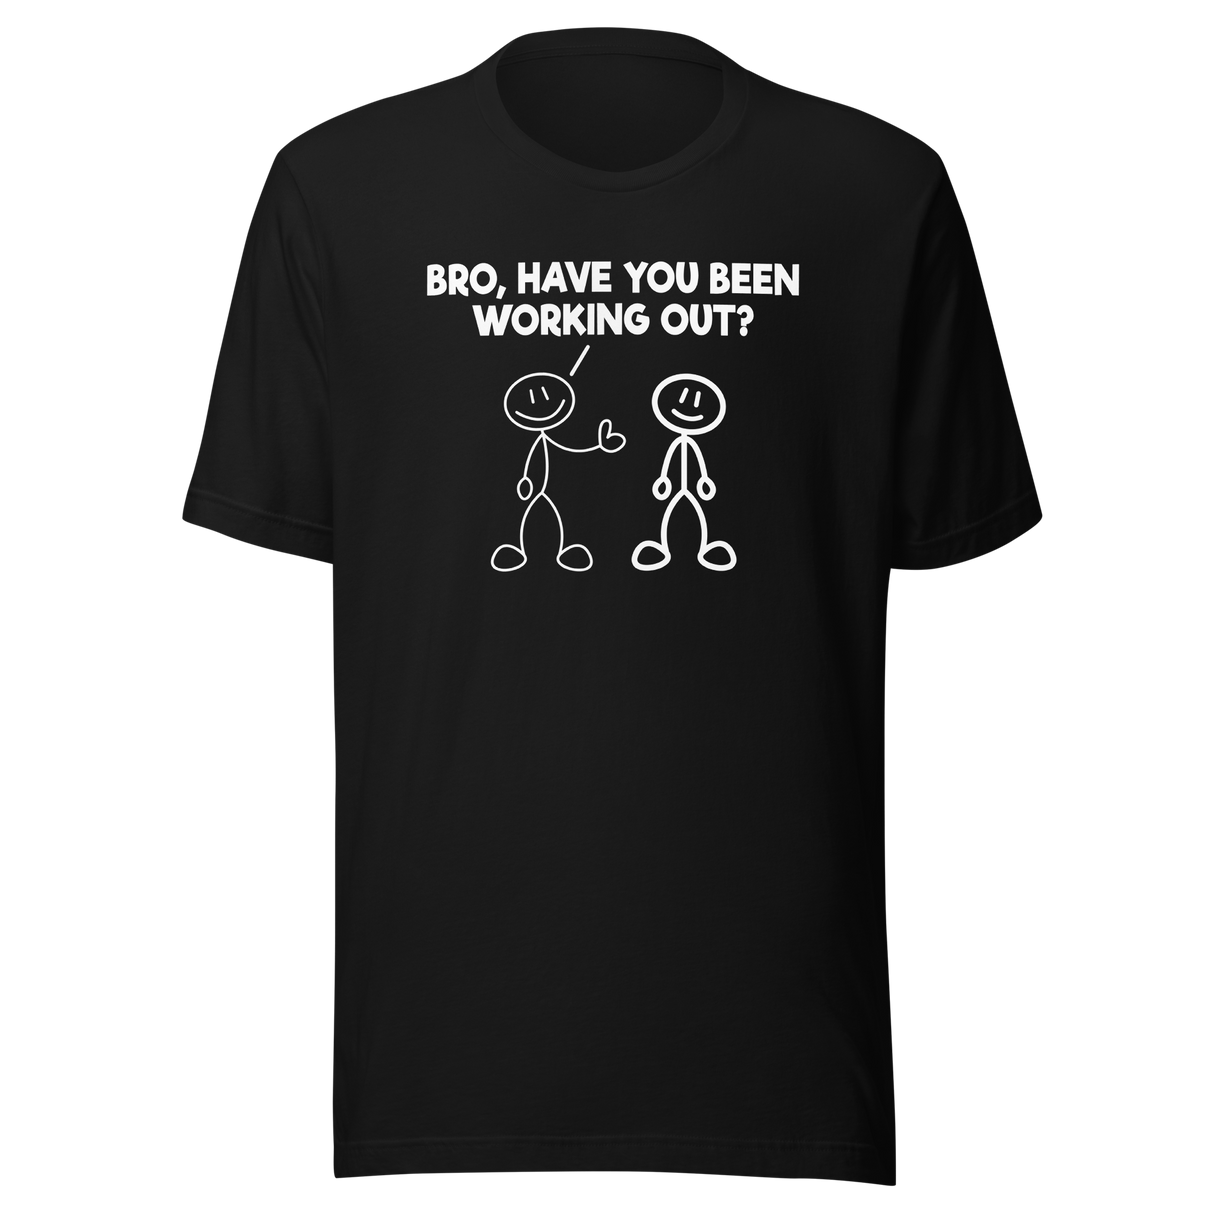 Bro Have You Been Working Out - Fitness Tee - Funny T-Shirt - Muscle Tee - Gym T-Shirt - Exercise Tee